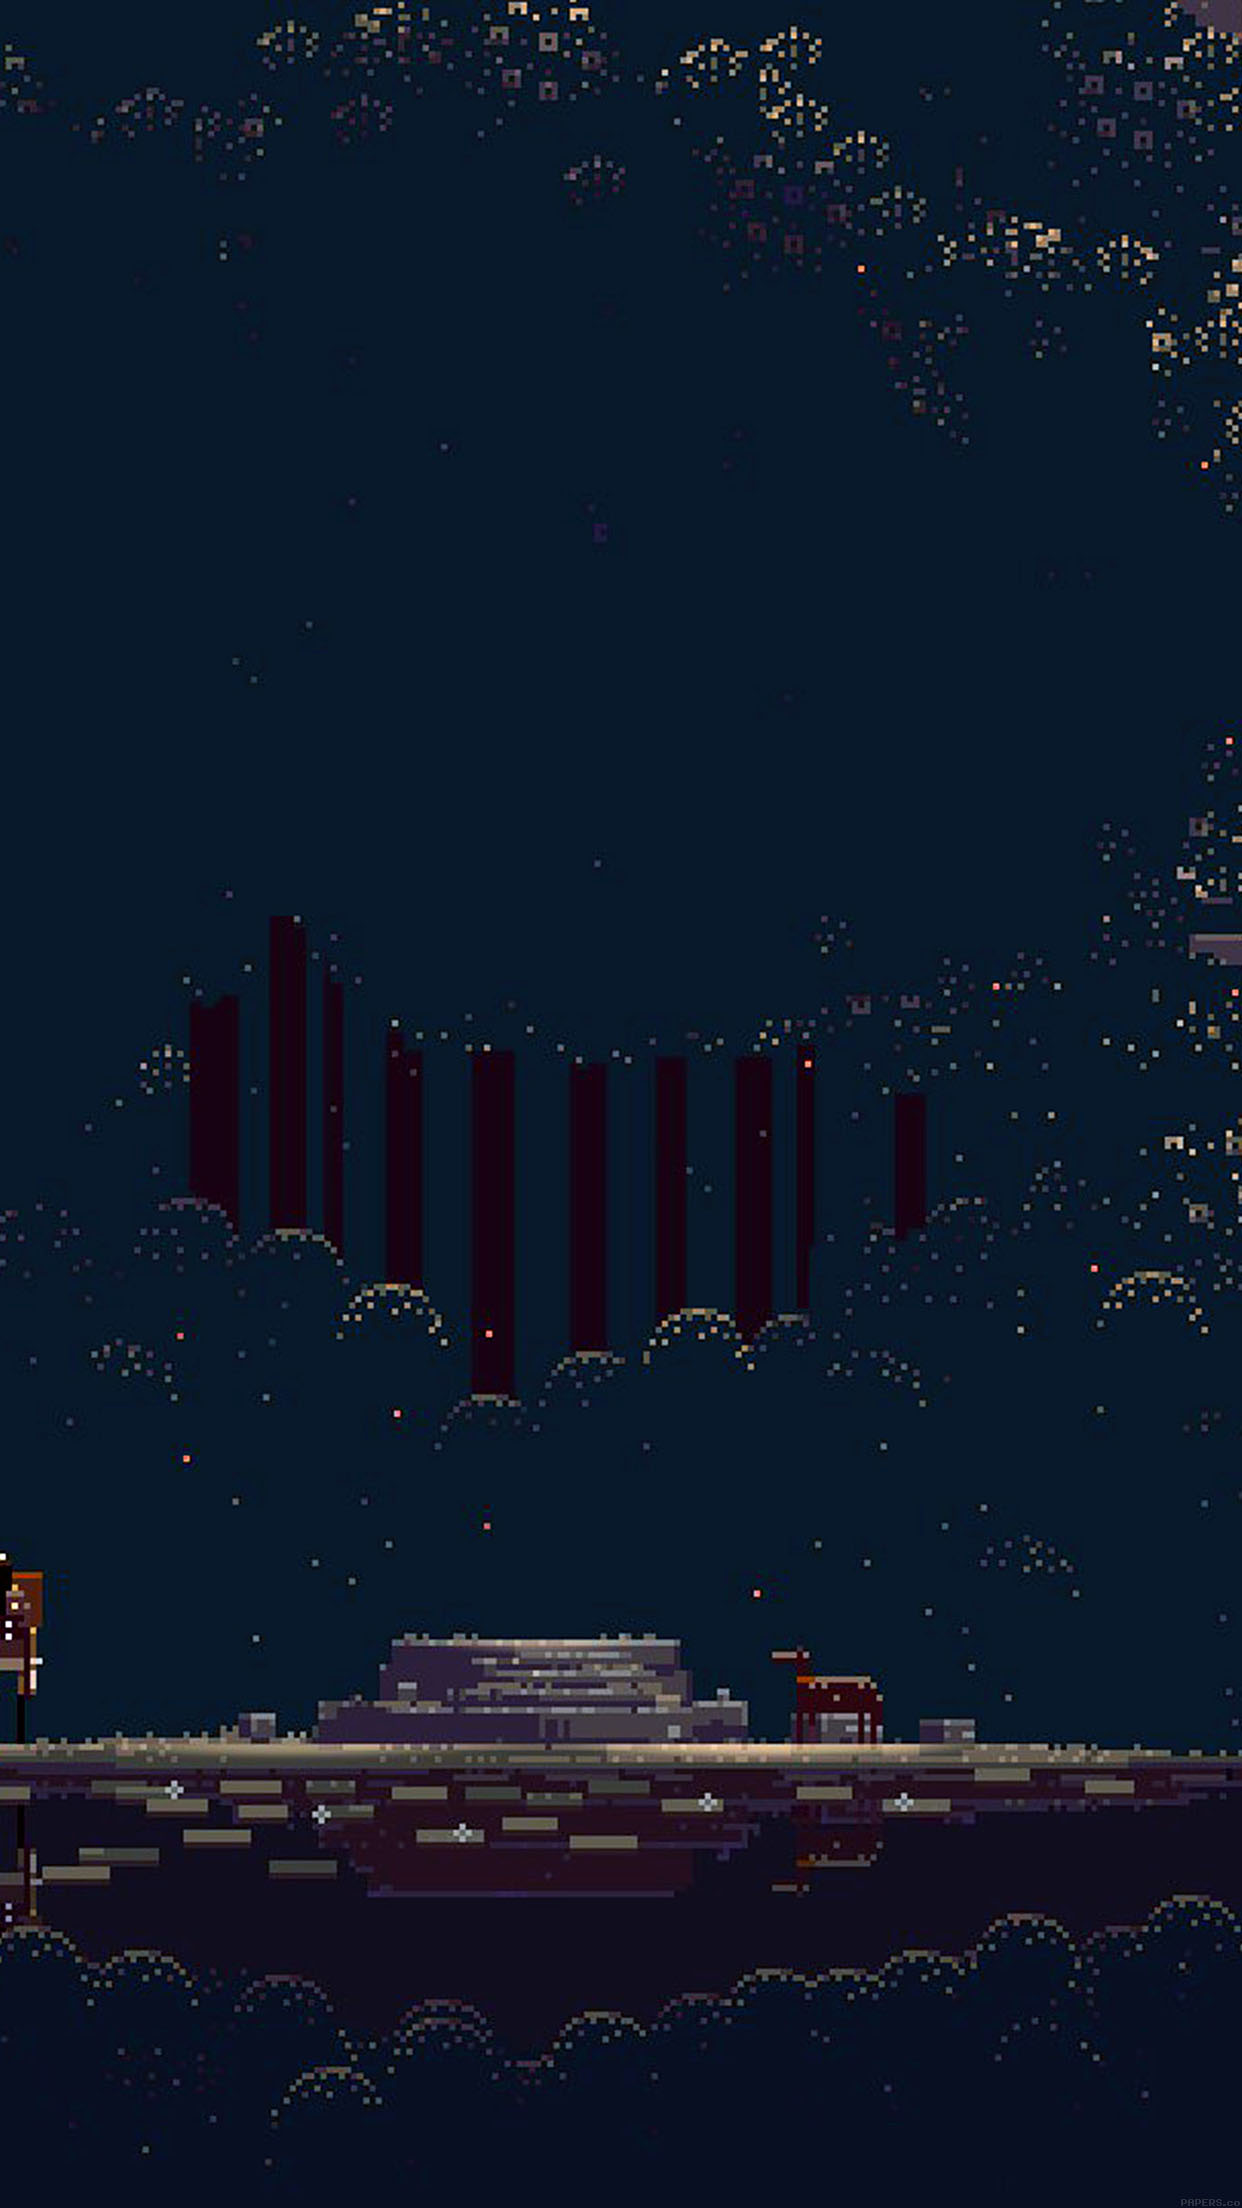 8 bit video game wallpapers for iPhone and iPad